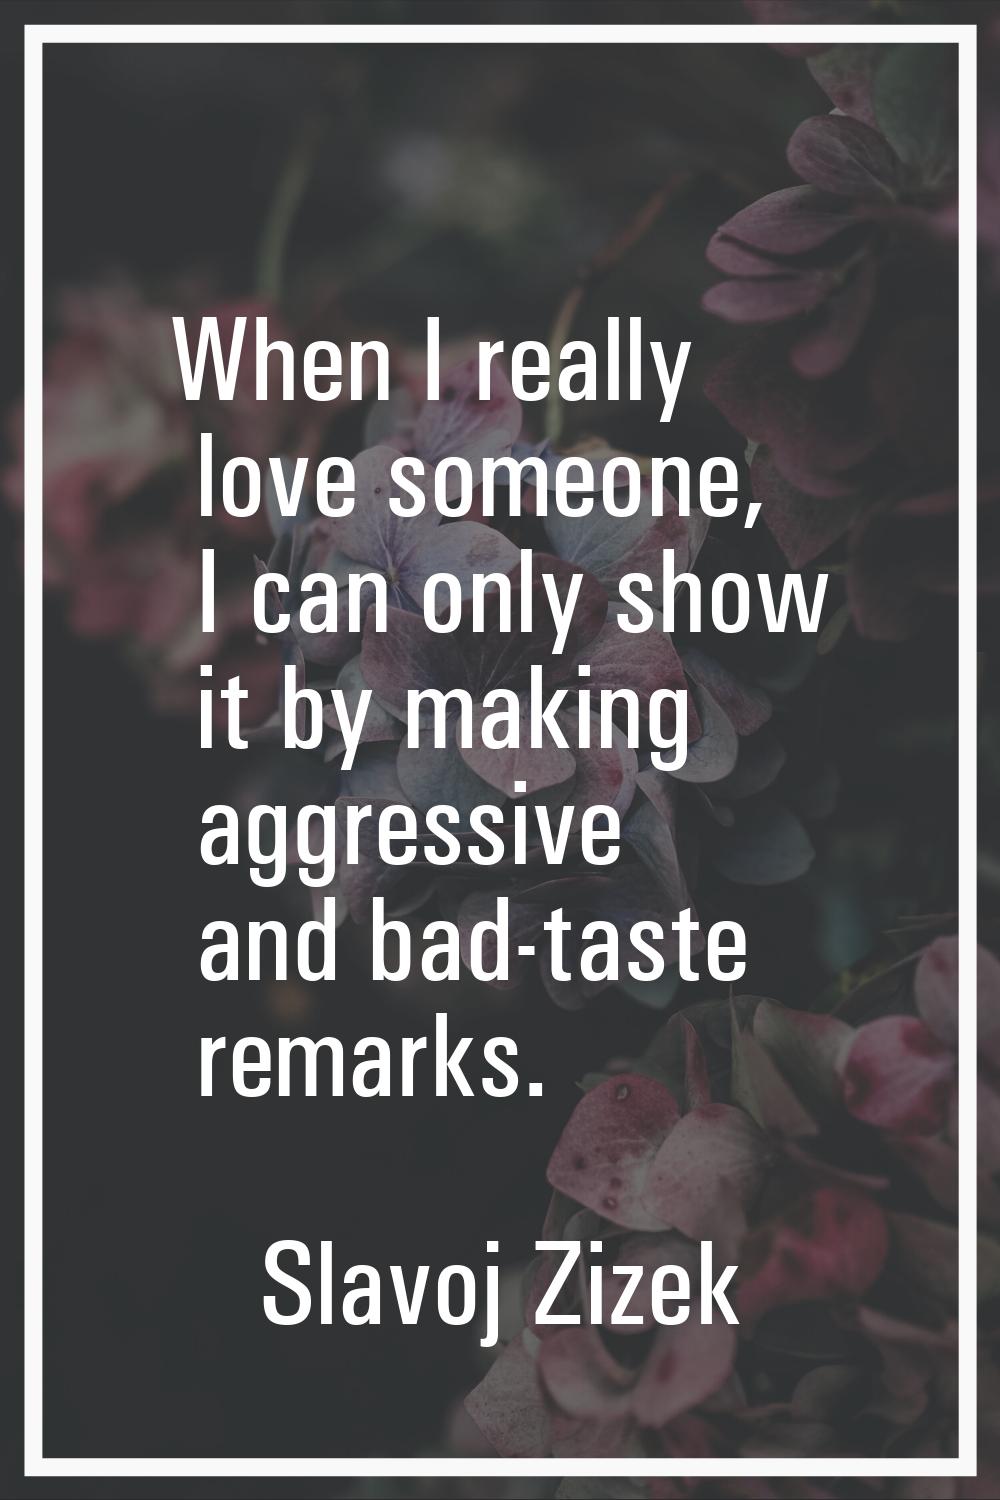 When I really love someone, I can only show it by making aggressive and bad-taste remarks.